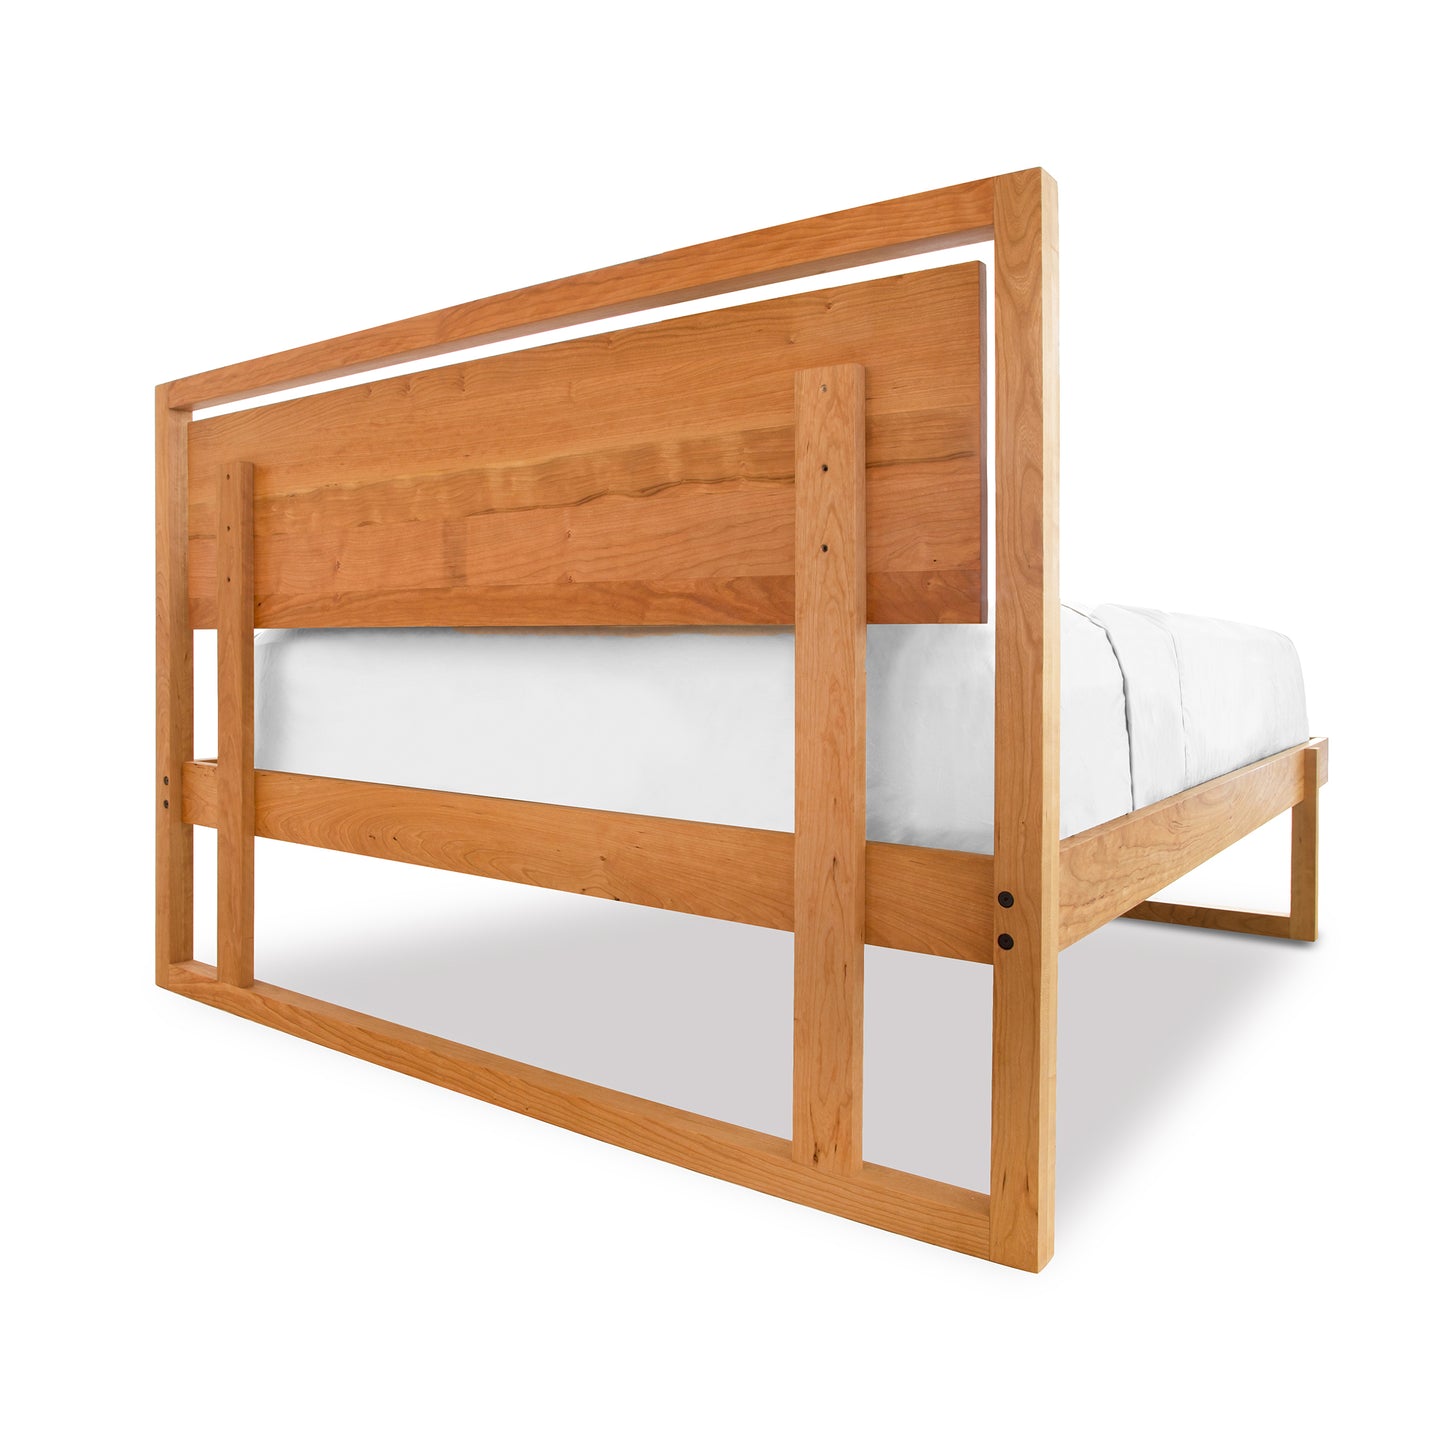 A Vermont Furniture Designs Pendant Bed, made from sustainably harvested cherry wood, with a white mattress, isolated on a white background.